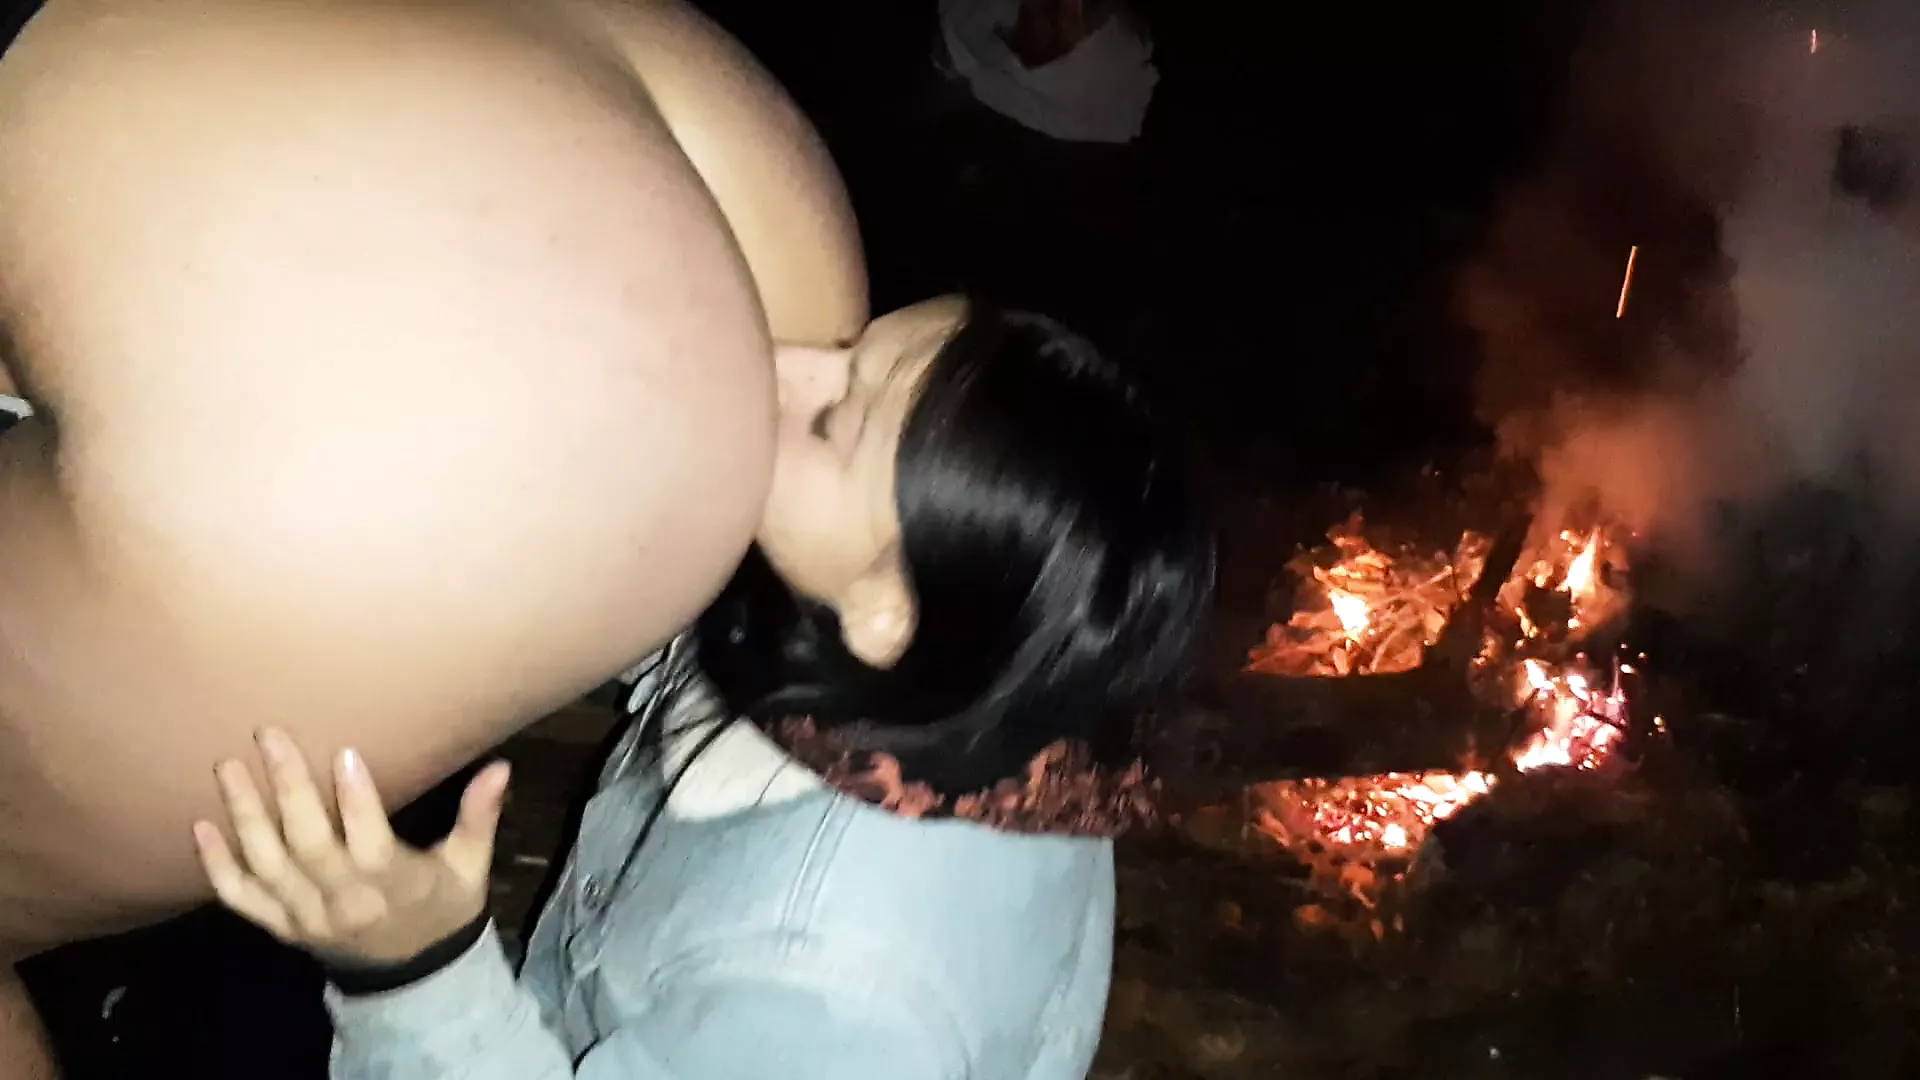 Lesbian Ass Licking Buried - Licked My Ass by the Fire When Friends Quit Smoking | xHamster